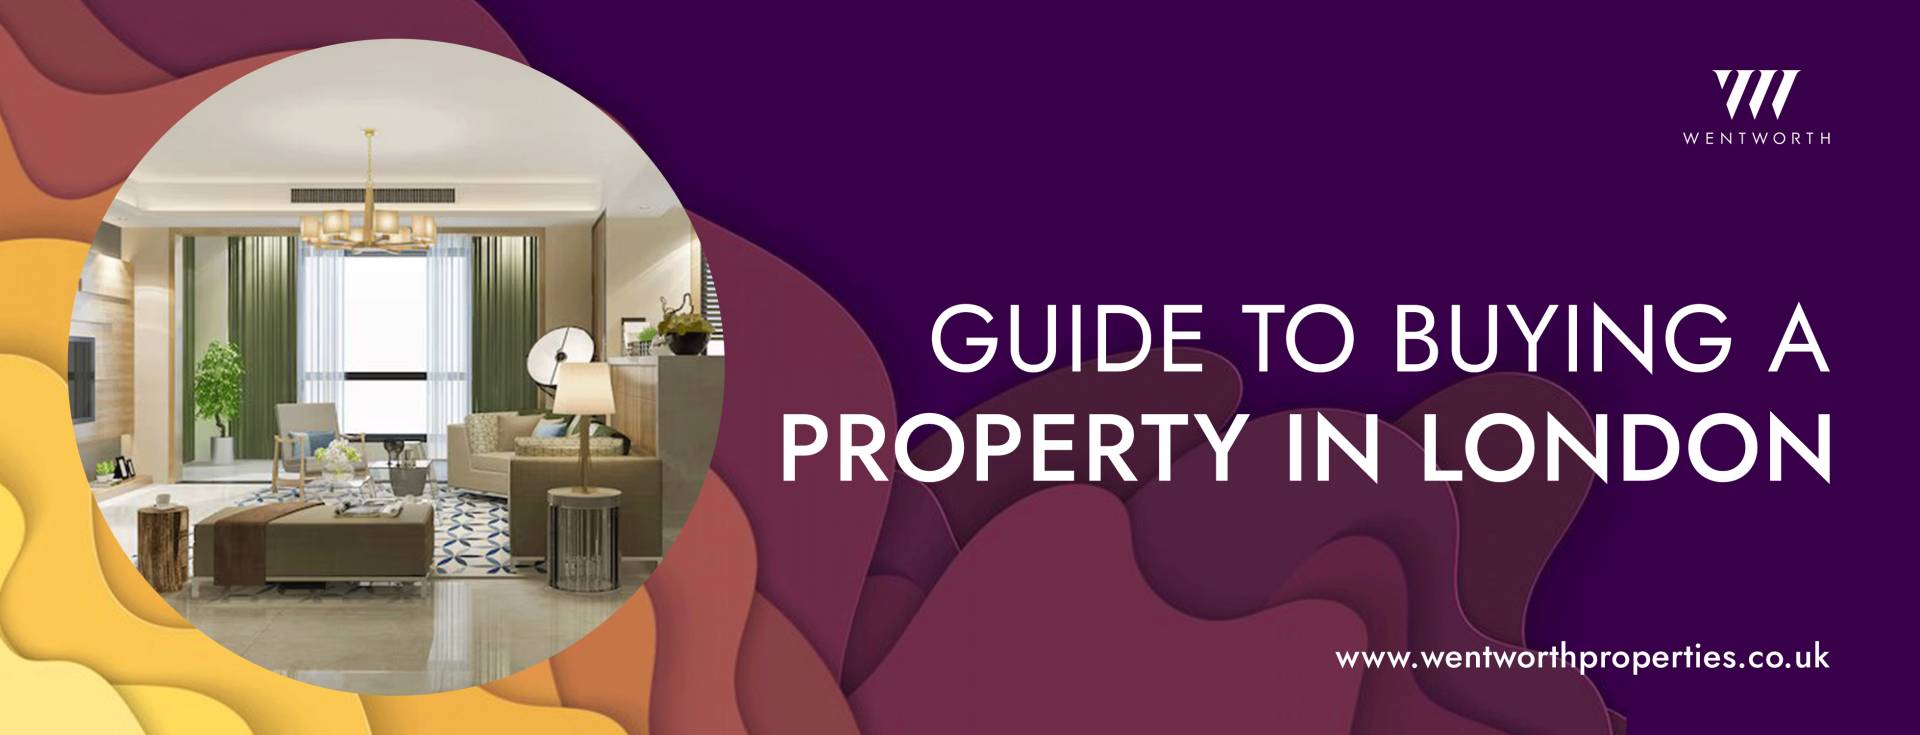 Guide To Buying A Property in London